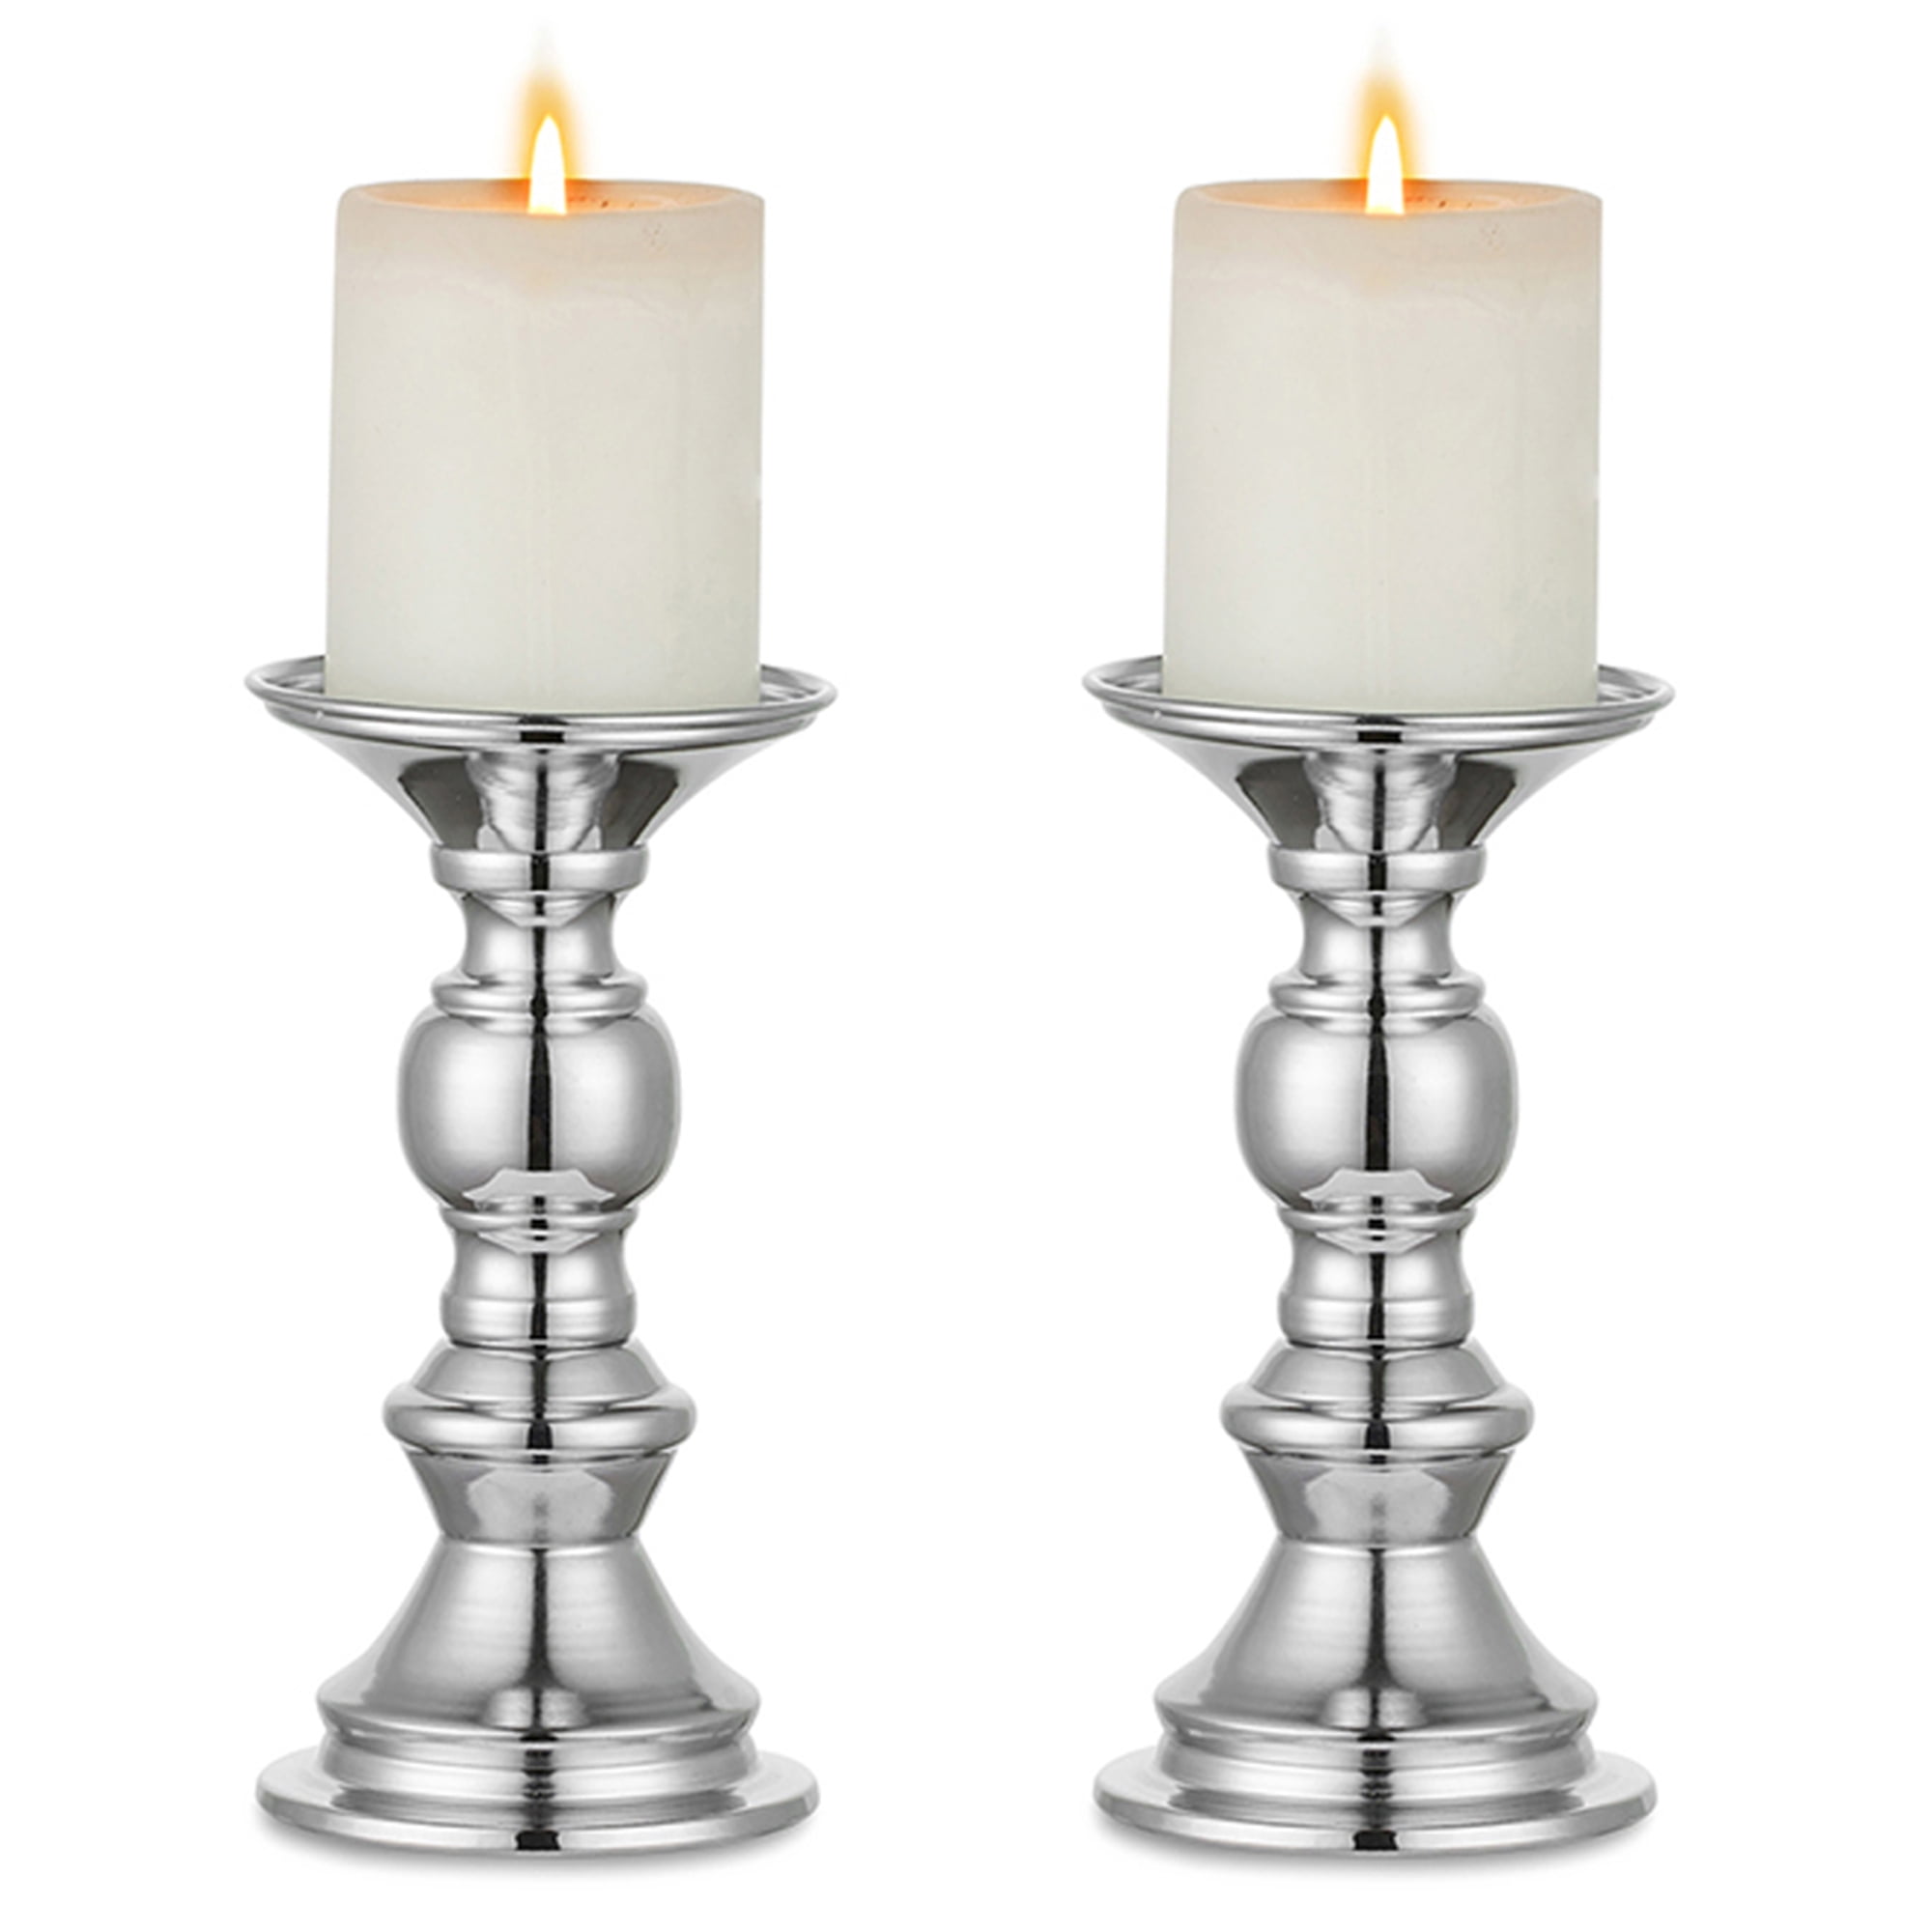 2 Pcs Nuptio Candlestick Holders Taper Candle Holder Wedding Housewarming Birthday Gifts Geometric Candle Holder Dining Table Candle Centrepiece Decorations for Living Room Bedroom Bathroom